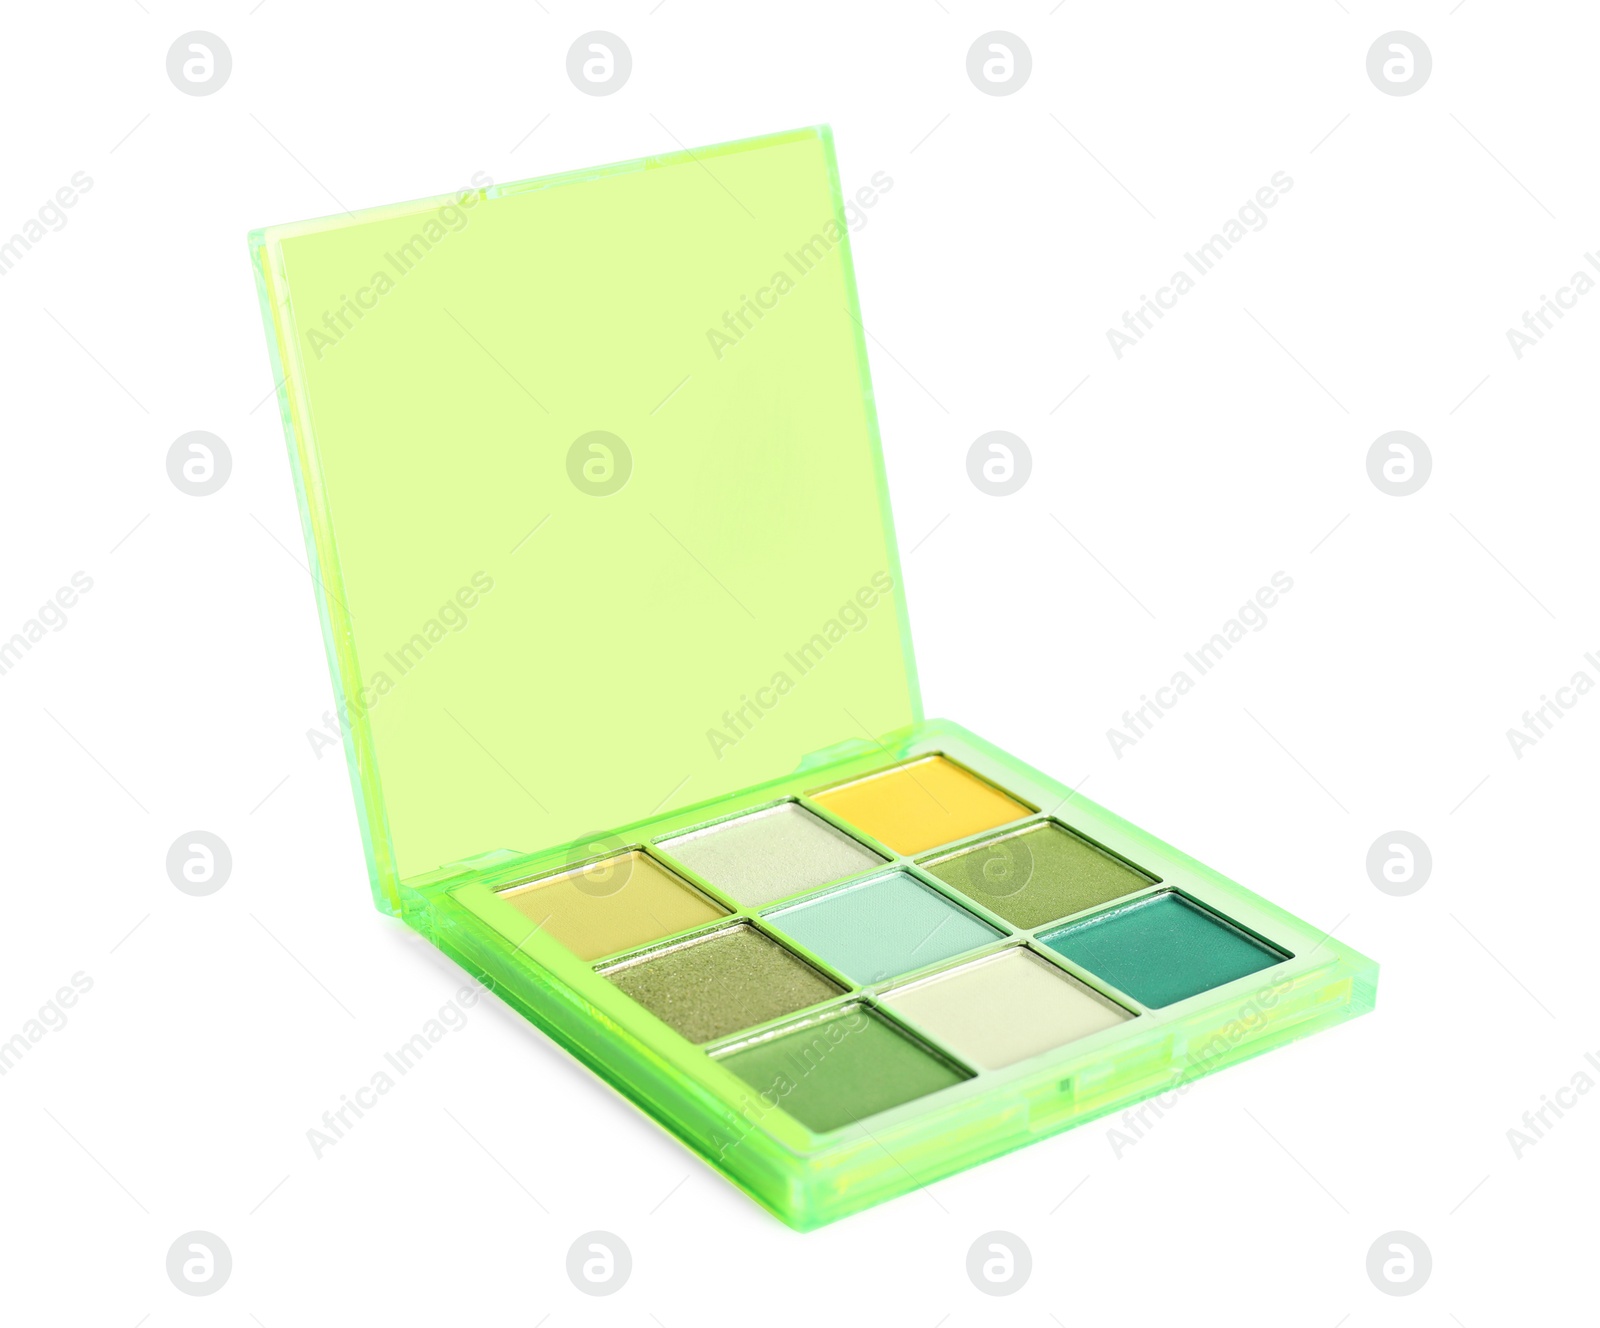 Photo of Beautiful eyeshadow palette isolated on white. Makeup product